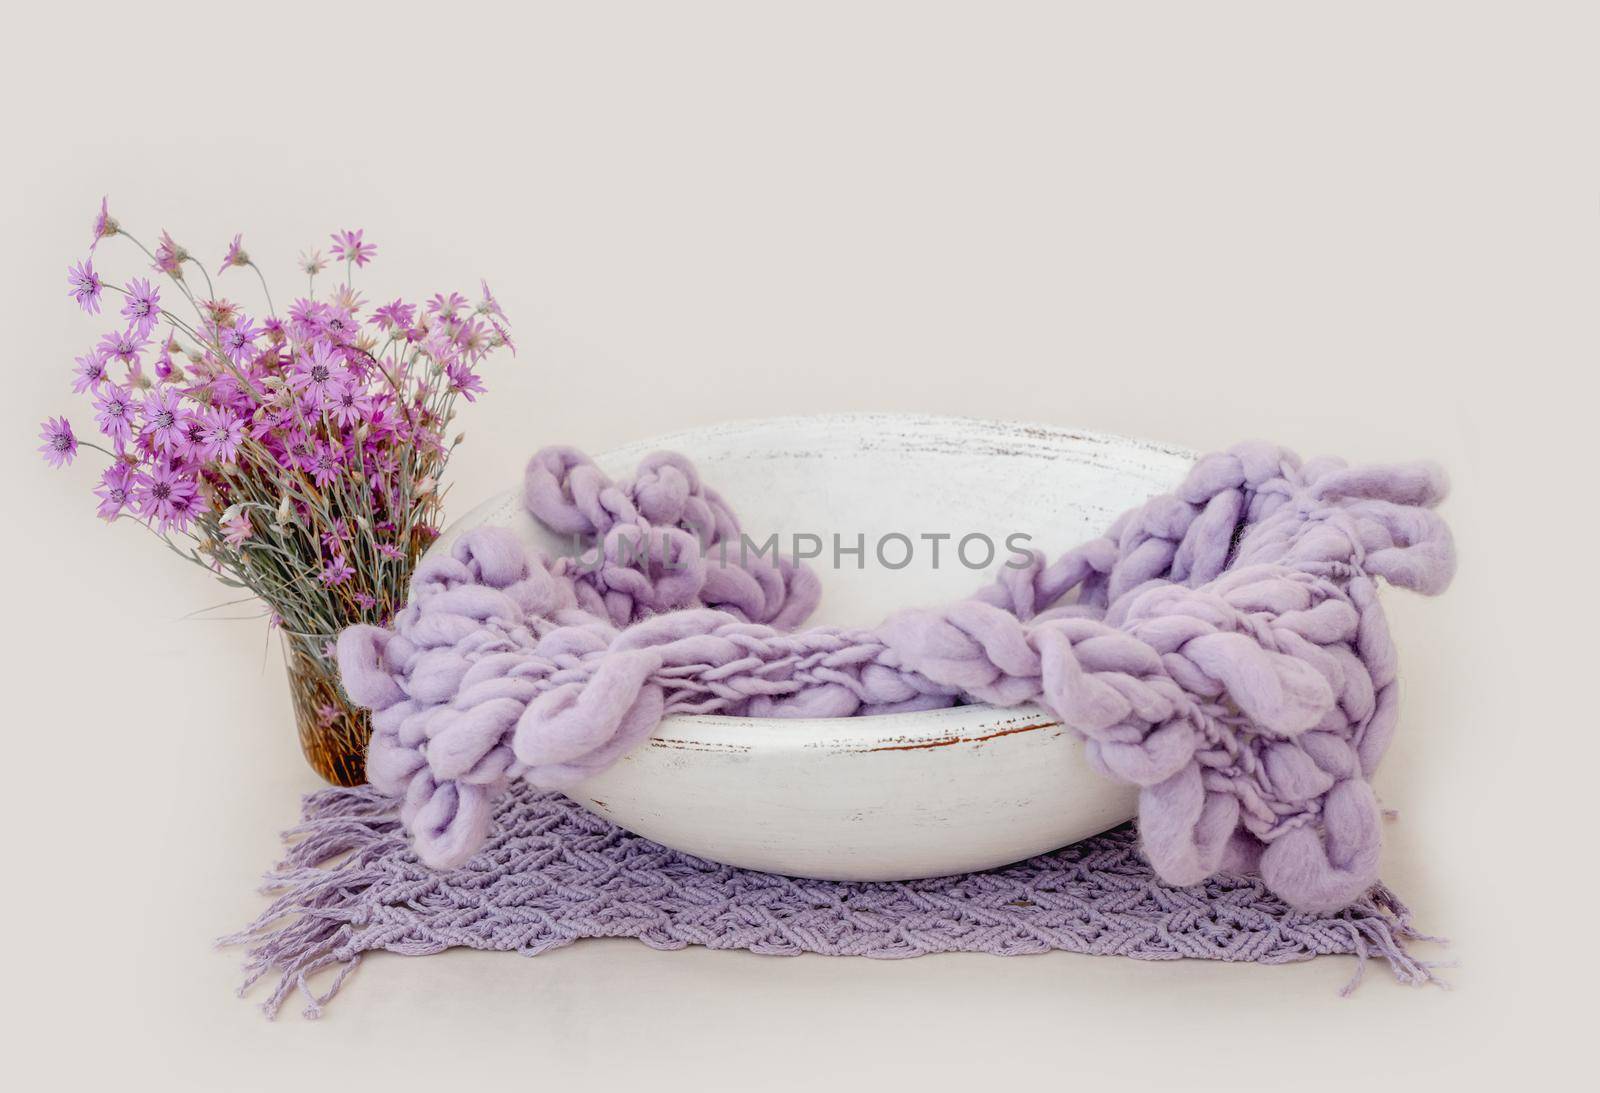 Wooden basin decor for newborn studio photoshoot filled with knitted blanket closeup. Infant baby photo furniture and flower bouquet